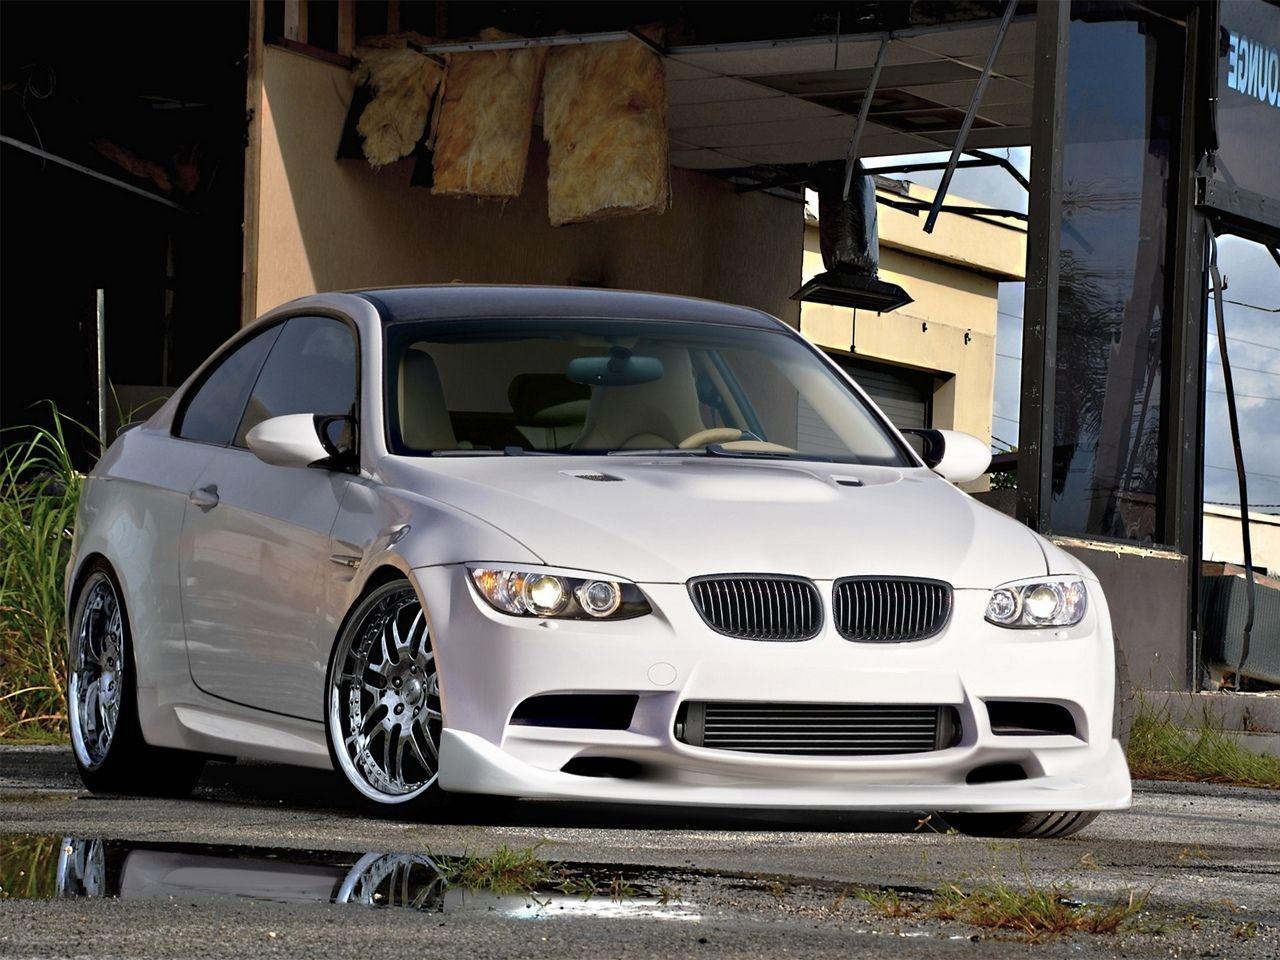 BMW image BMW M3 GT TUNING HD wallpaper and background photo